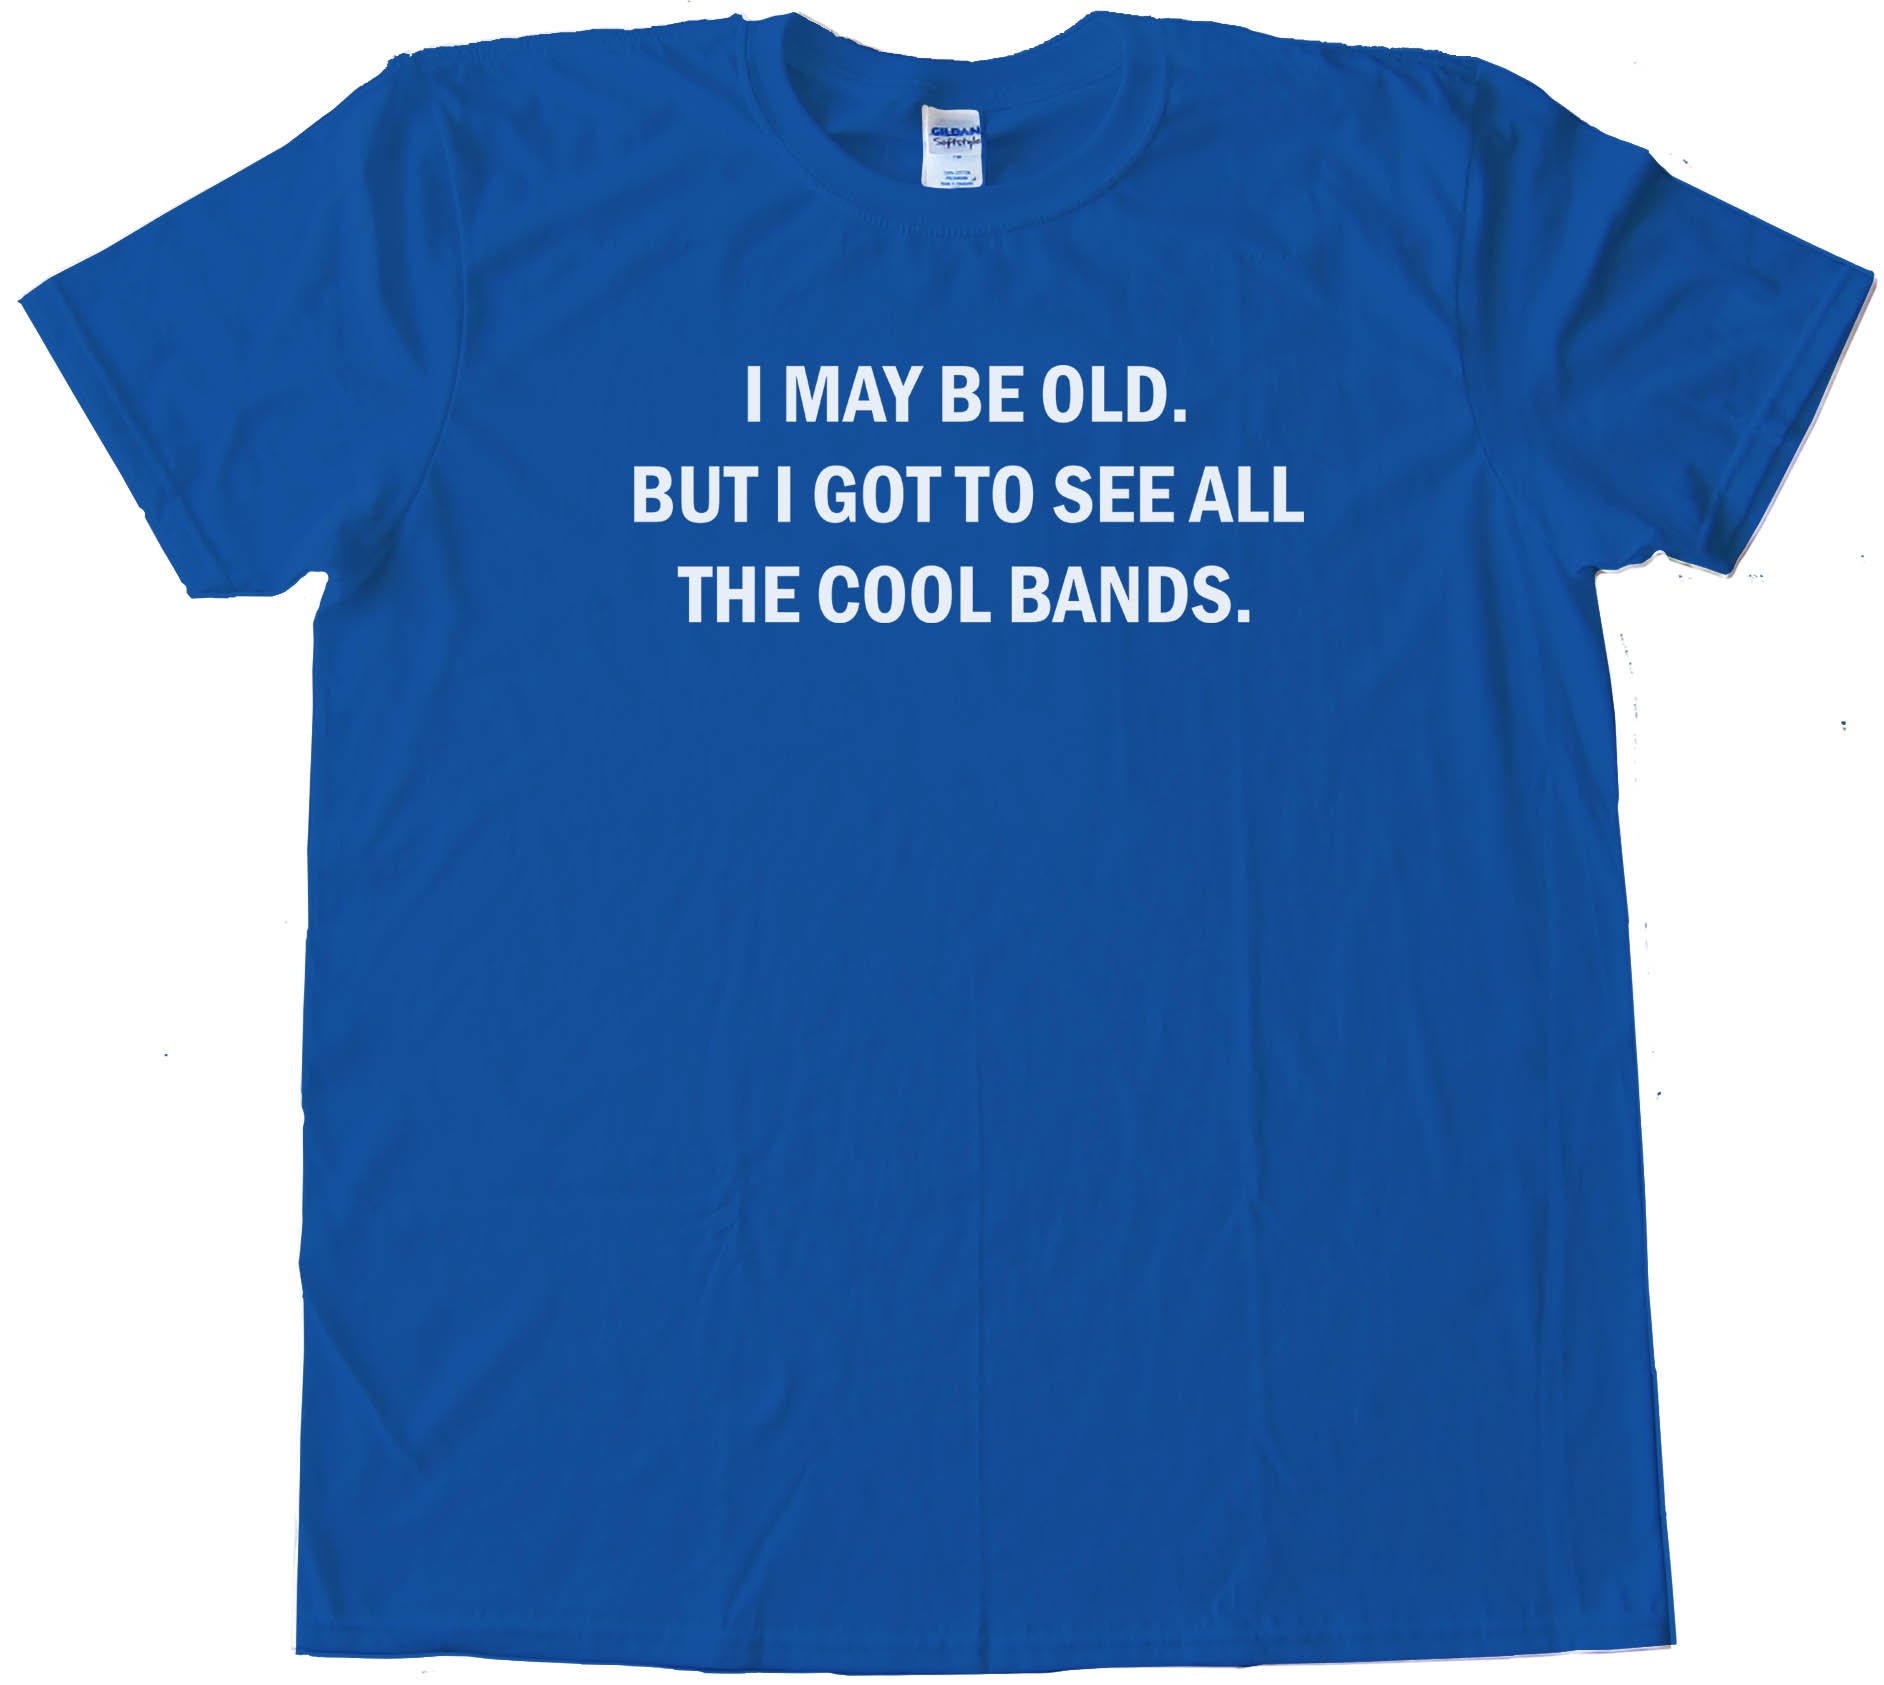 I May Be Old But I Got To See All The Cool Bands - Tee Shirt